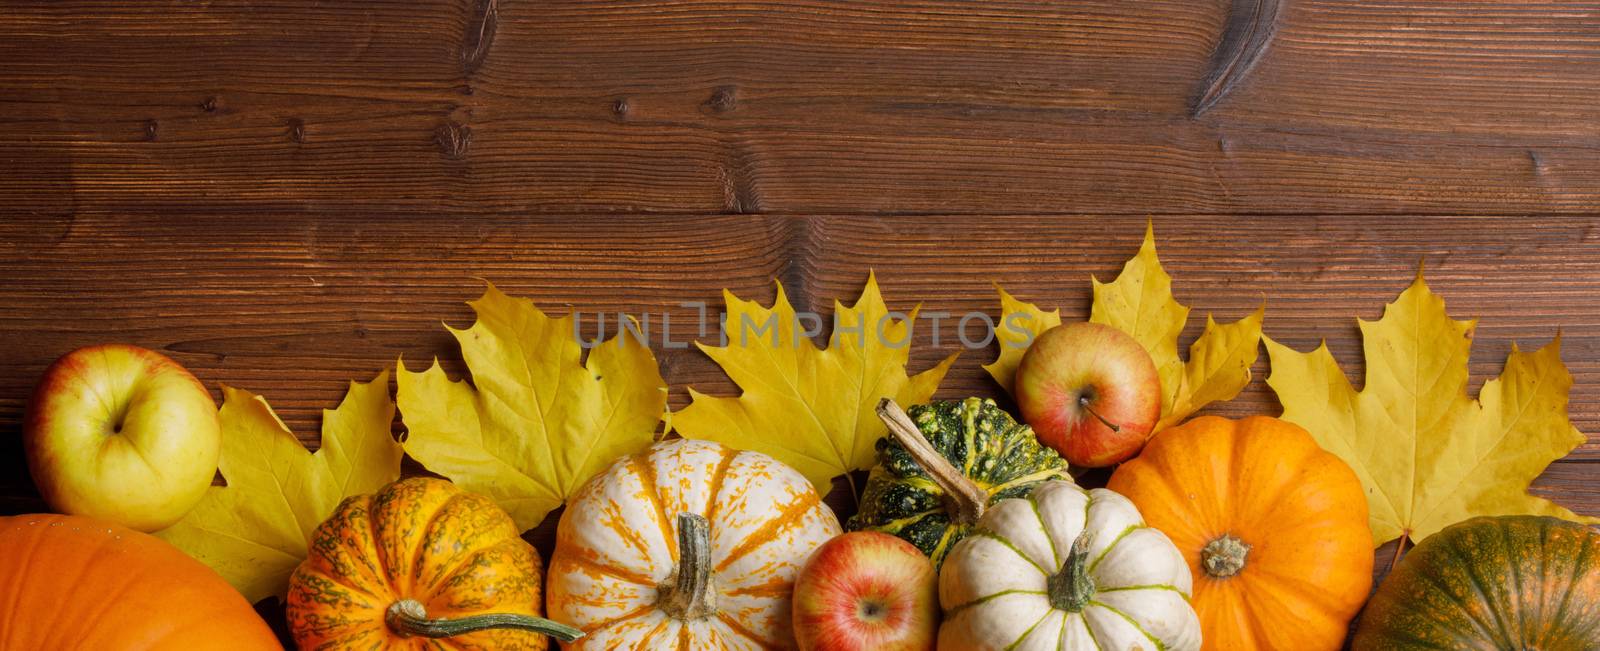 Pumpkins on wooden background by Yellowj